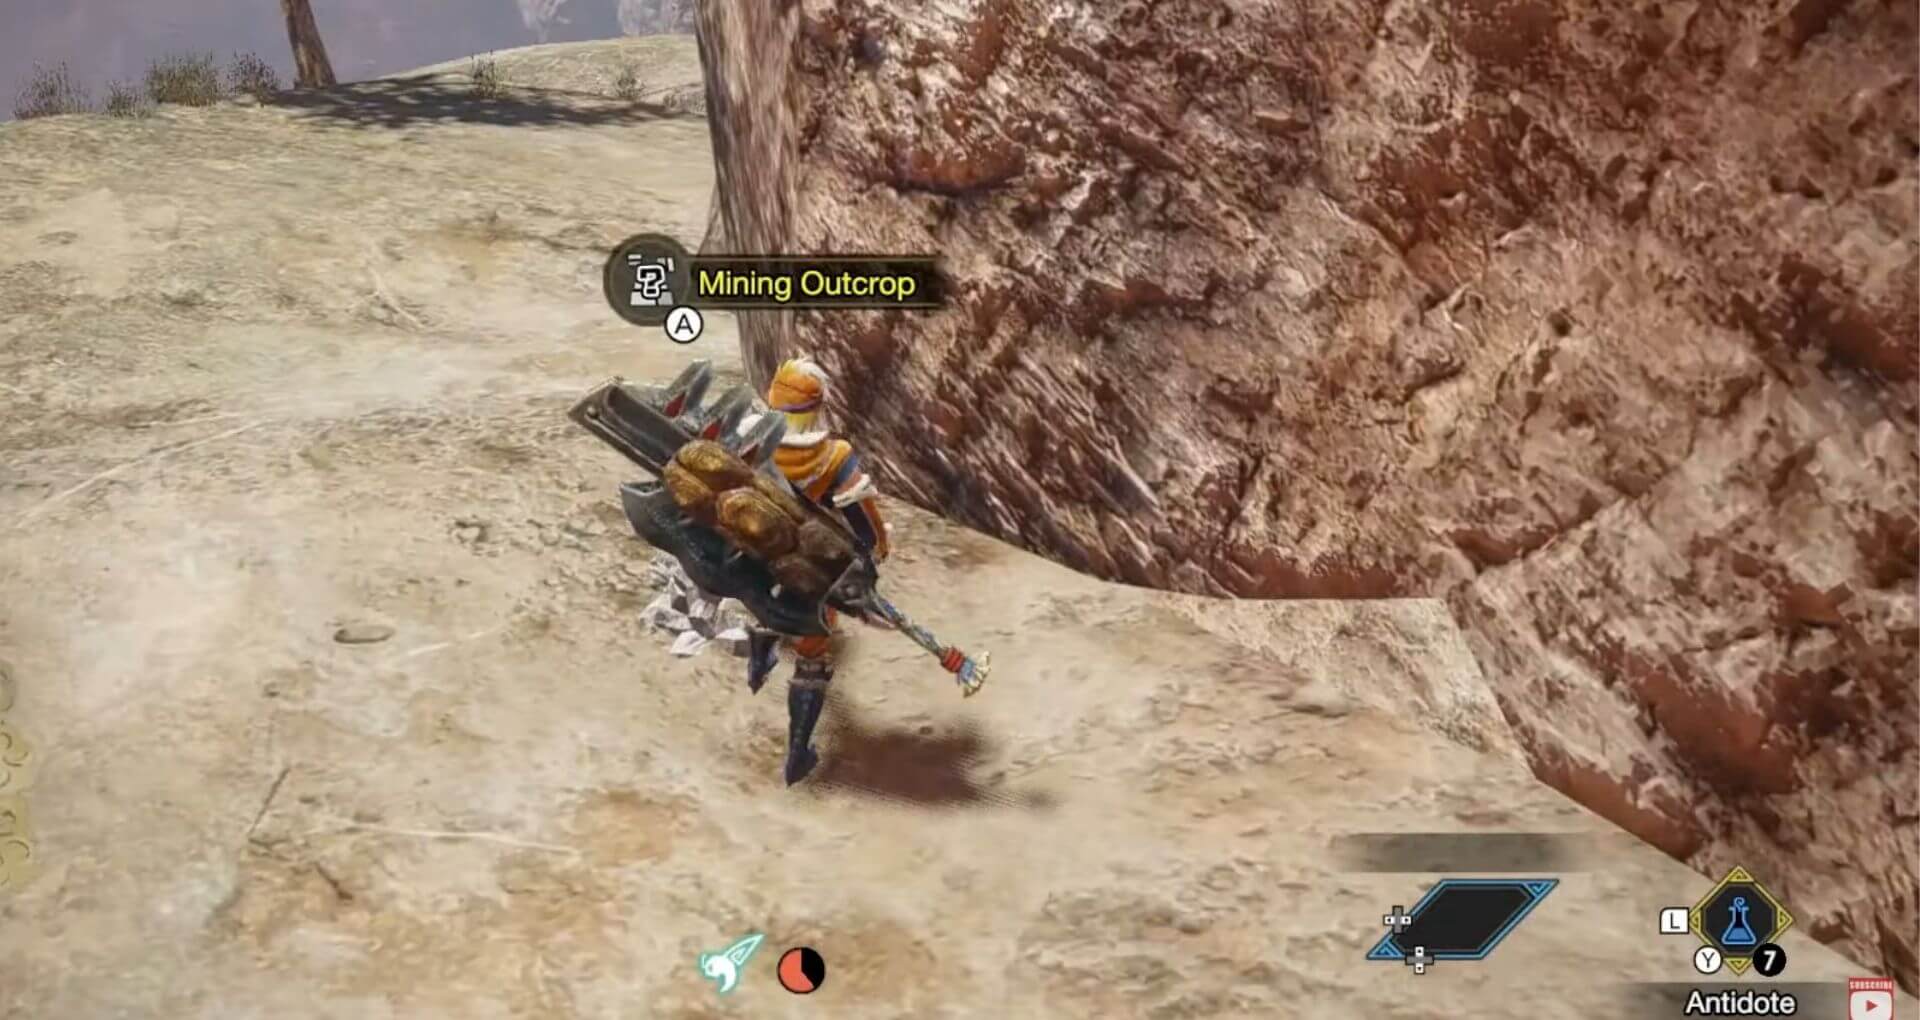 Mining outcrop in Monster Hunter Rise